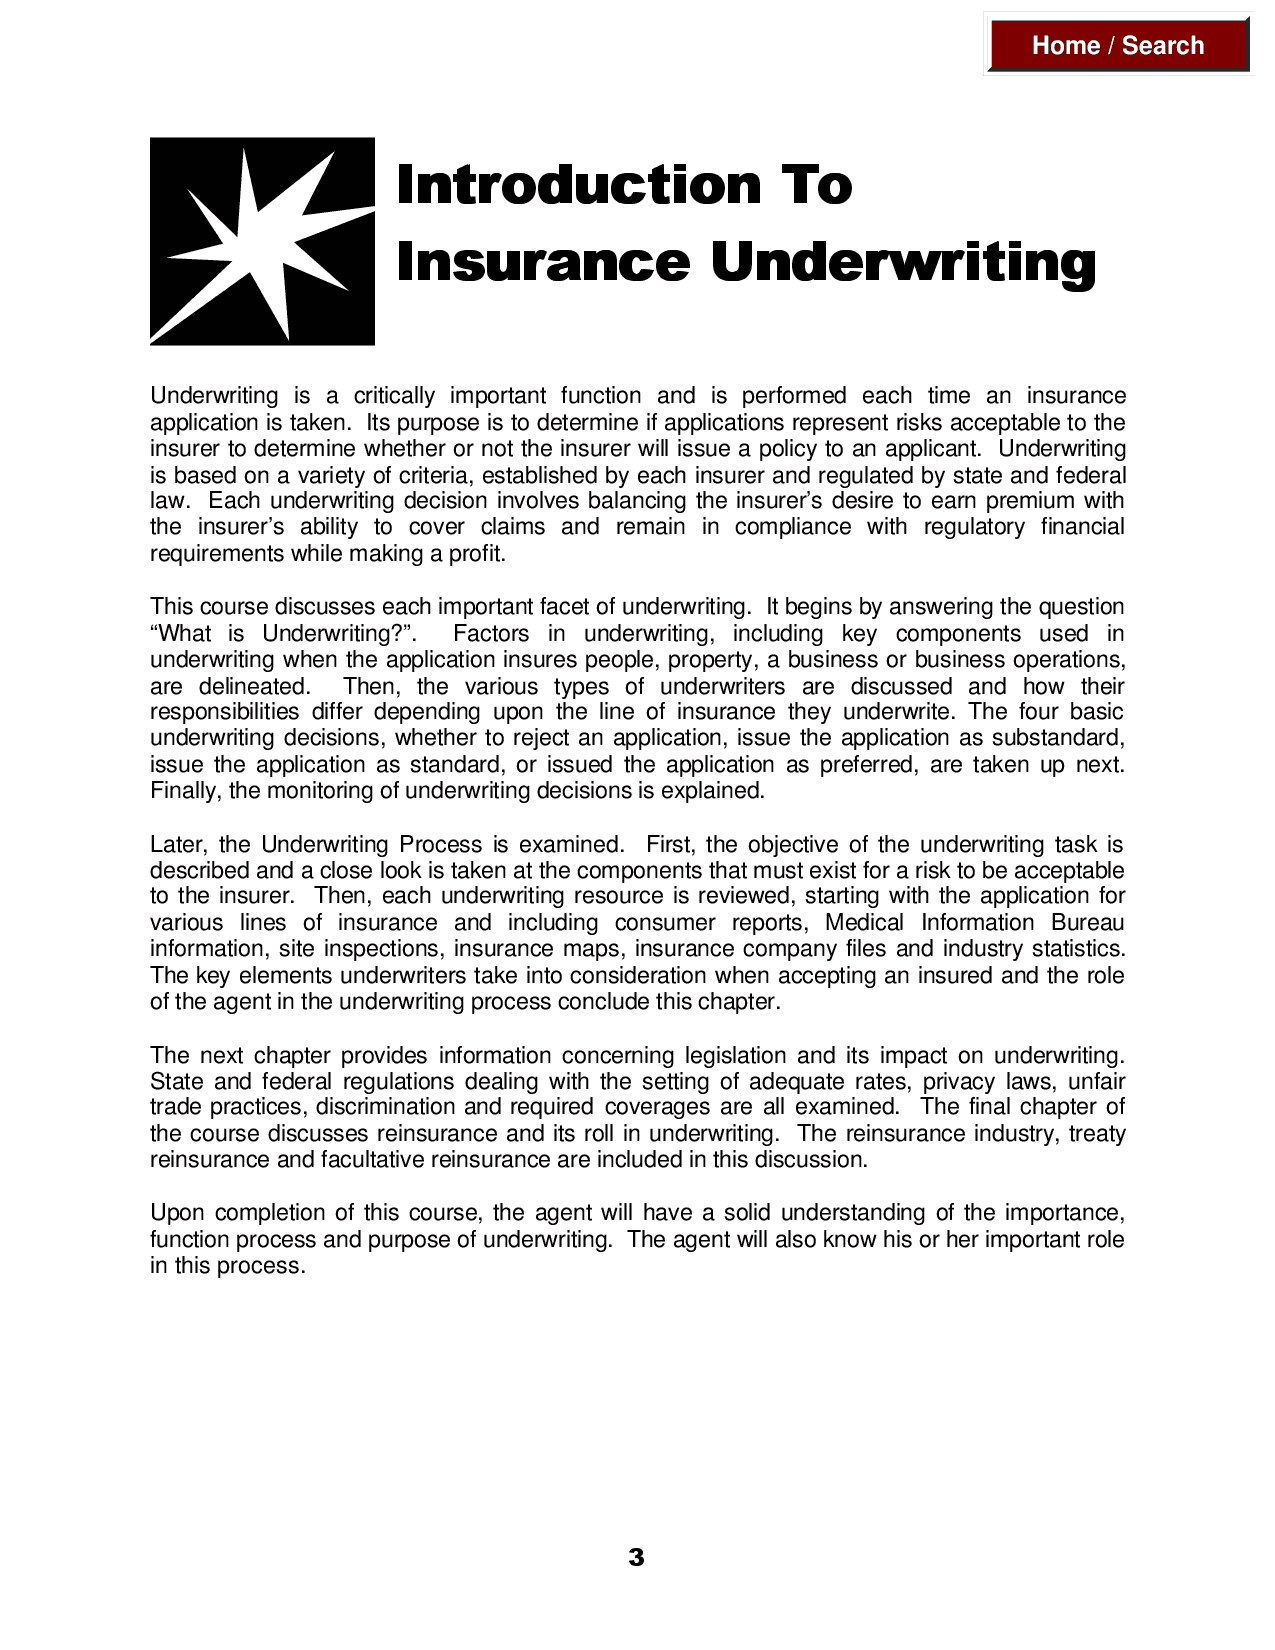 Insurance Underwriting Docsity throughout size 1275 X 1650